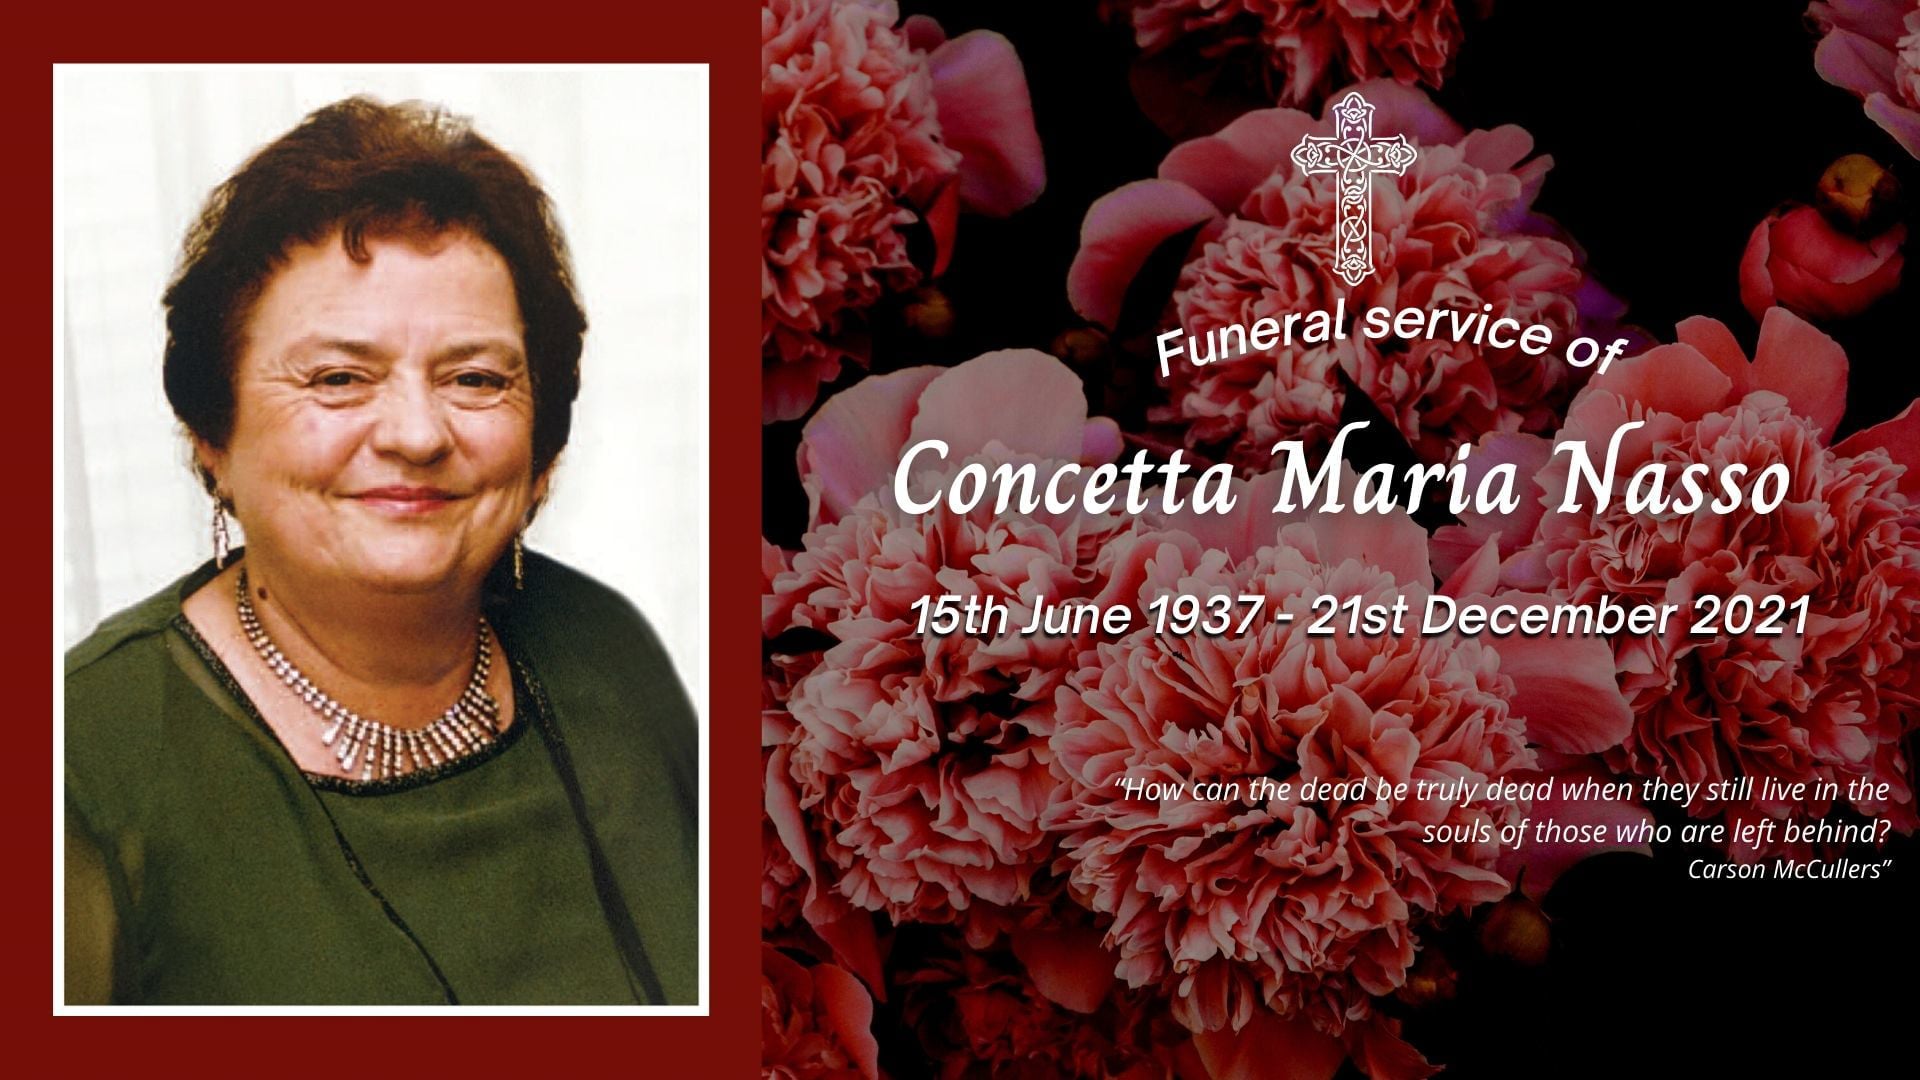 Funeral Service of Concetta Maria Nasso